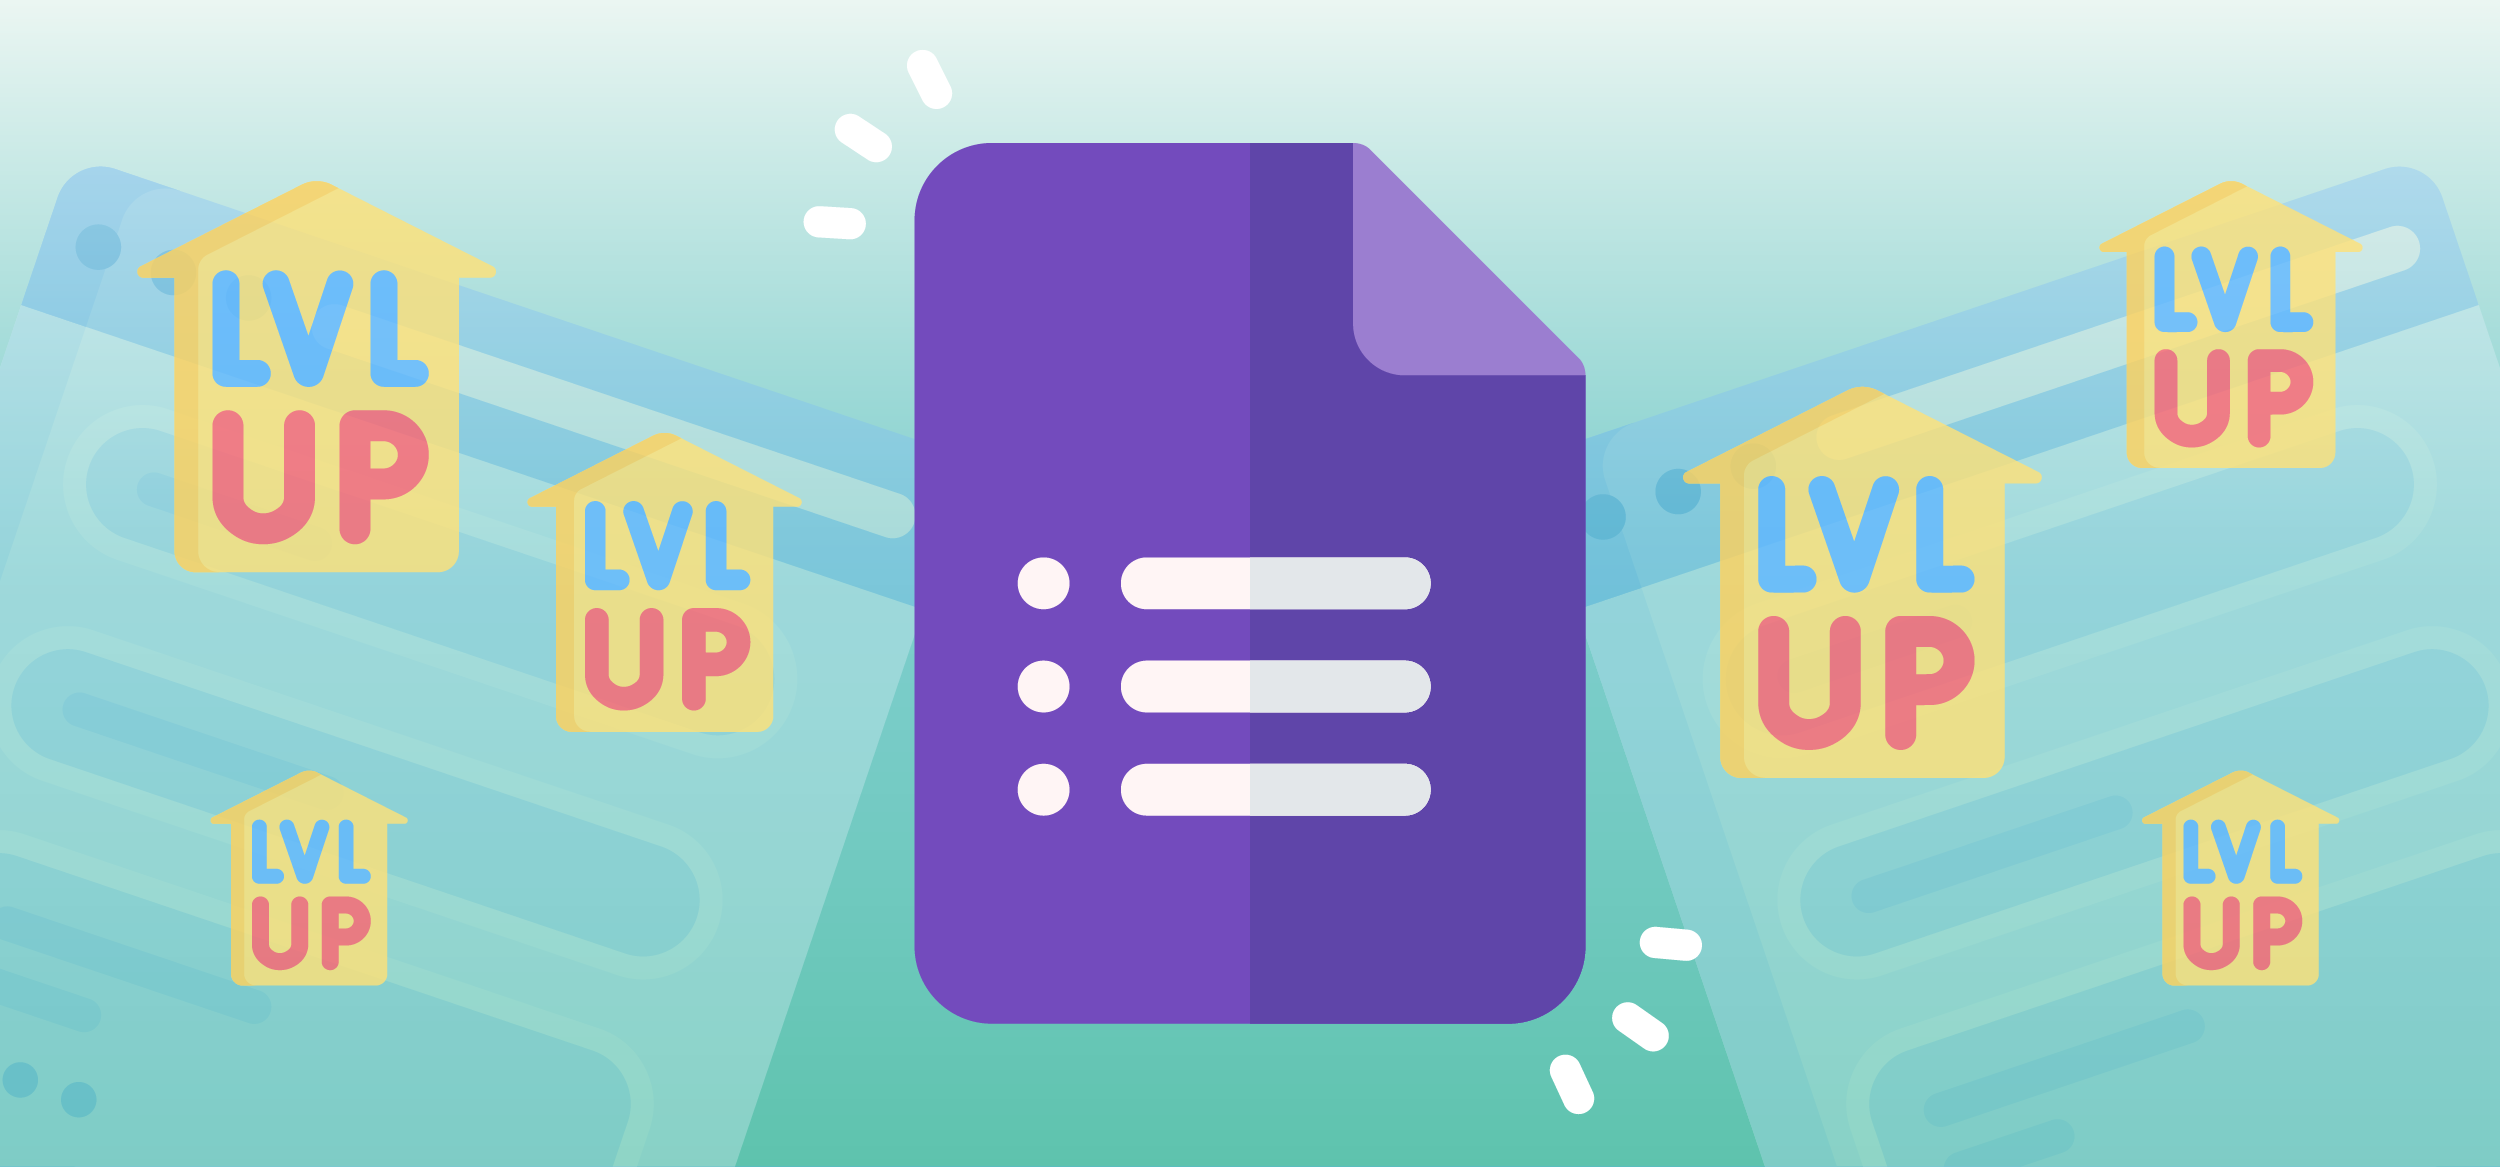 Level up your Google Forms for K-12 without needing add-ons!